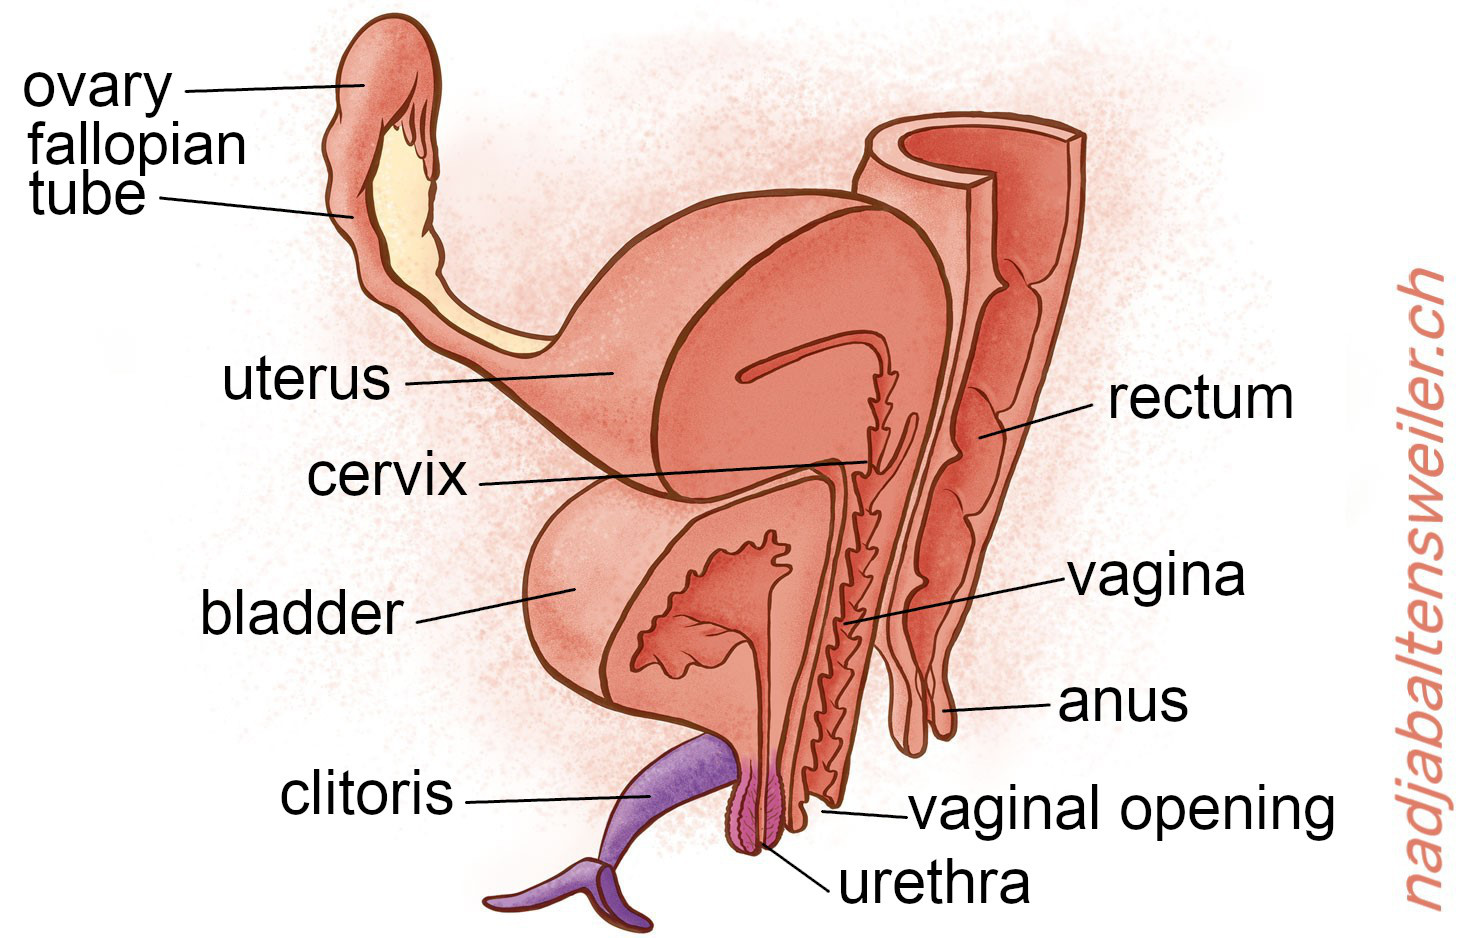 You see a longitudinal section of sexual organs. At the very front is the clitoris with its crura, behind it is the urethra and behind that is the vaginal opening. At the back is the anus. The rectum connects to the top of the anus. At the upper end of the vagina is the cervix, which leads to the uterus. The fallopian tube and the ovary connect to the side of the uterus. Above the urethra lies the bladder. It also lies in front of the vagina and below the uterus.